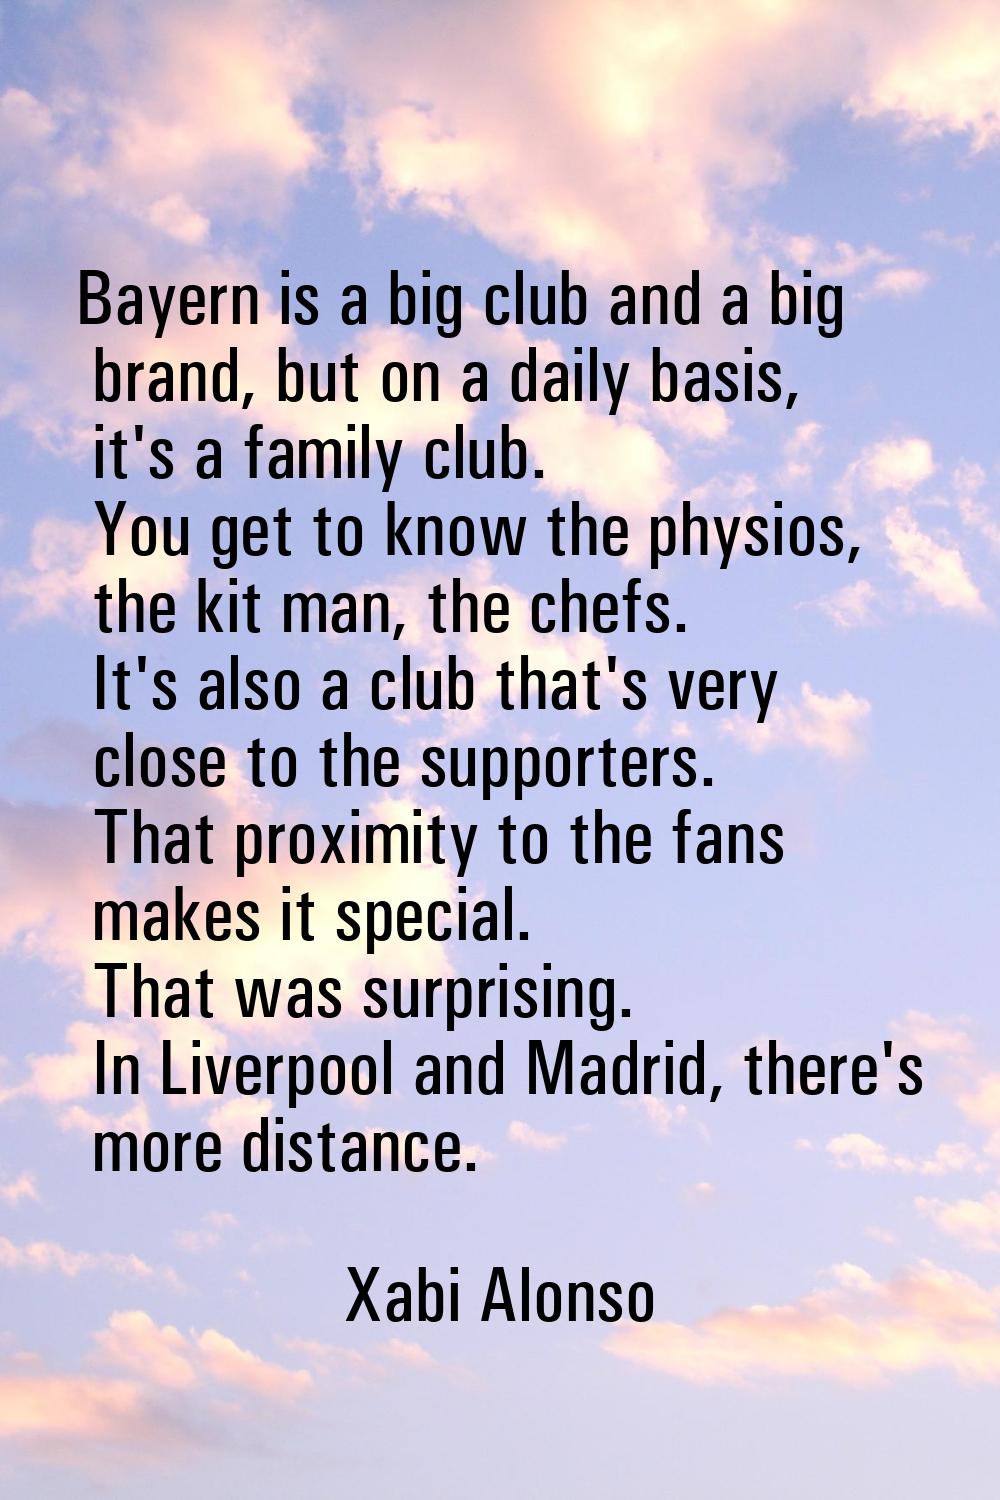 Bayern is a big club and a big brand, but on a daily basis, it's a family club. You get to know the